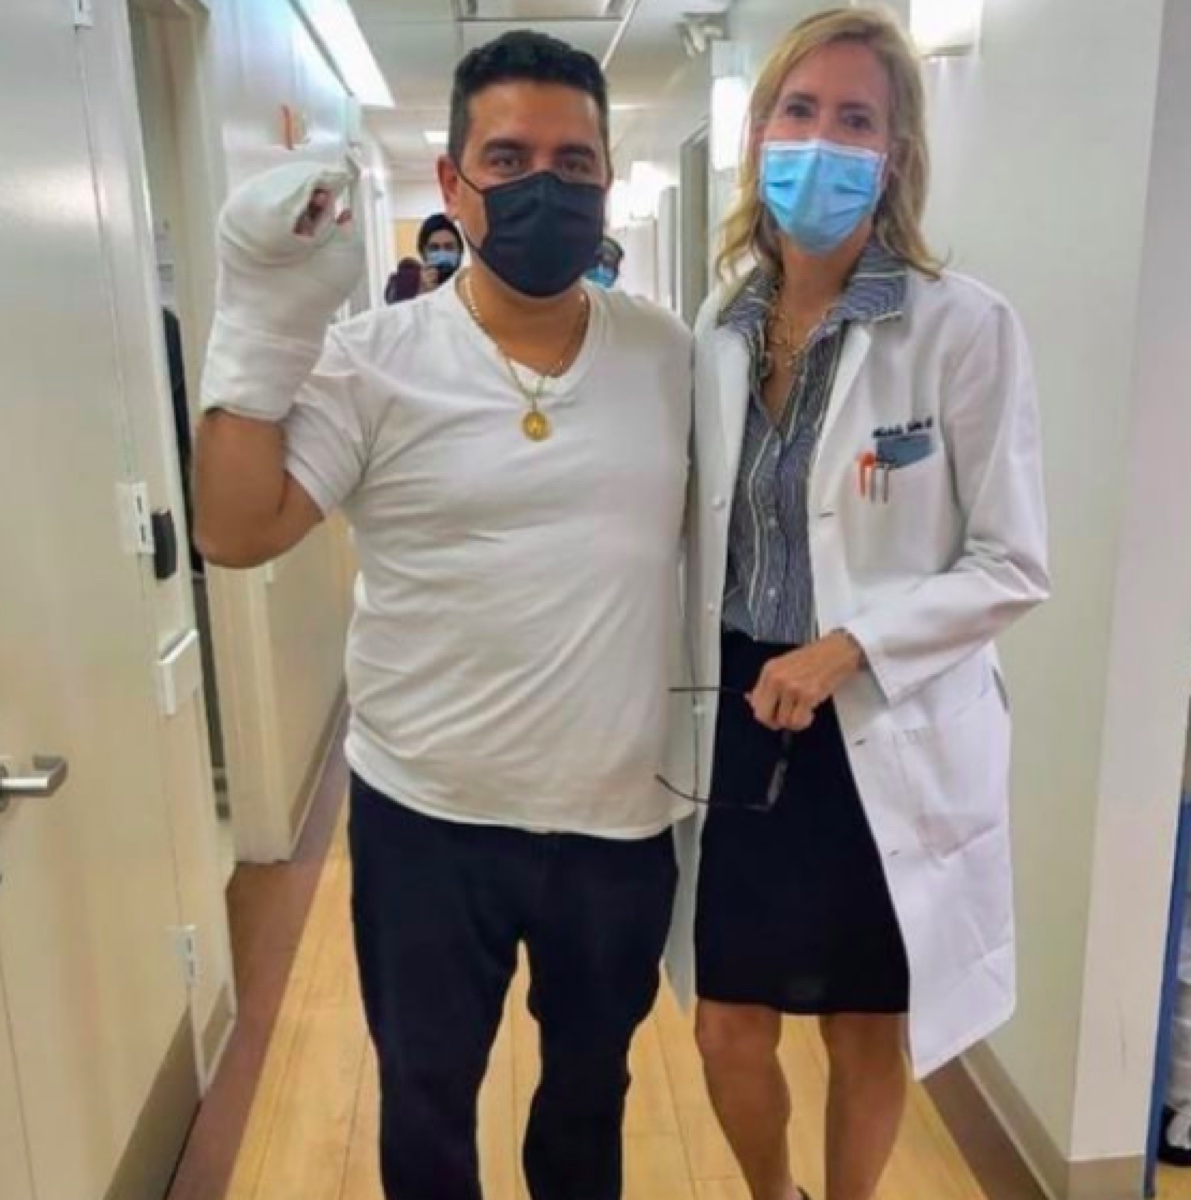 Buddy Valastro with his doctor on Instagram